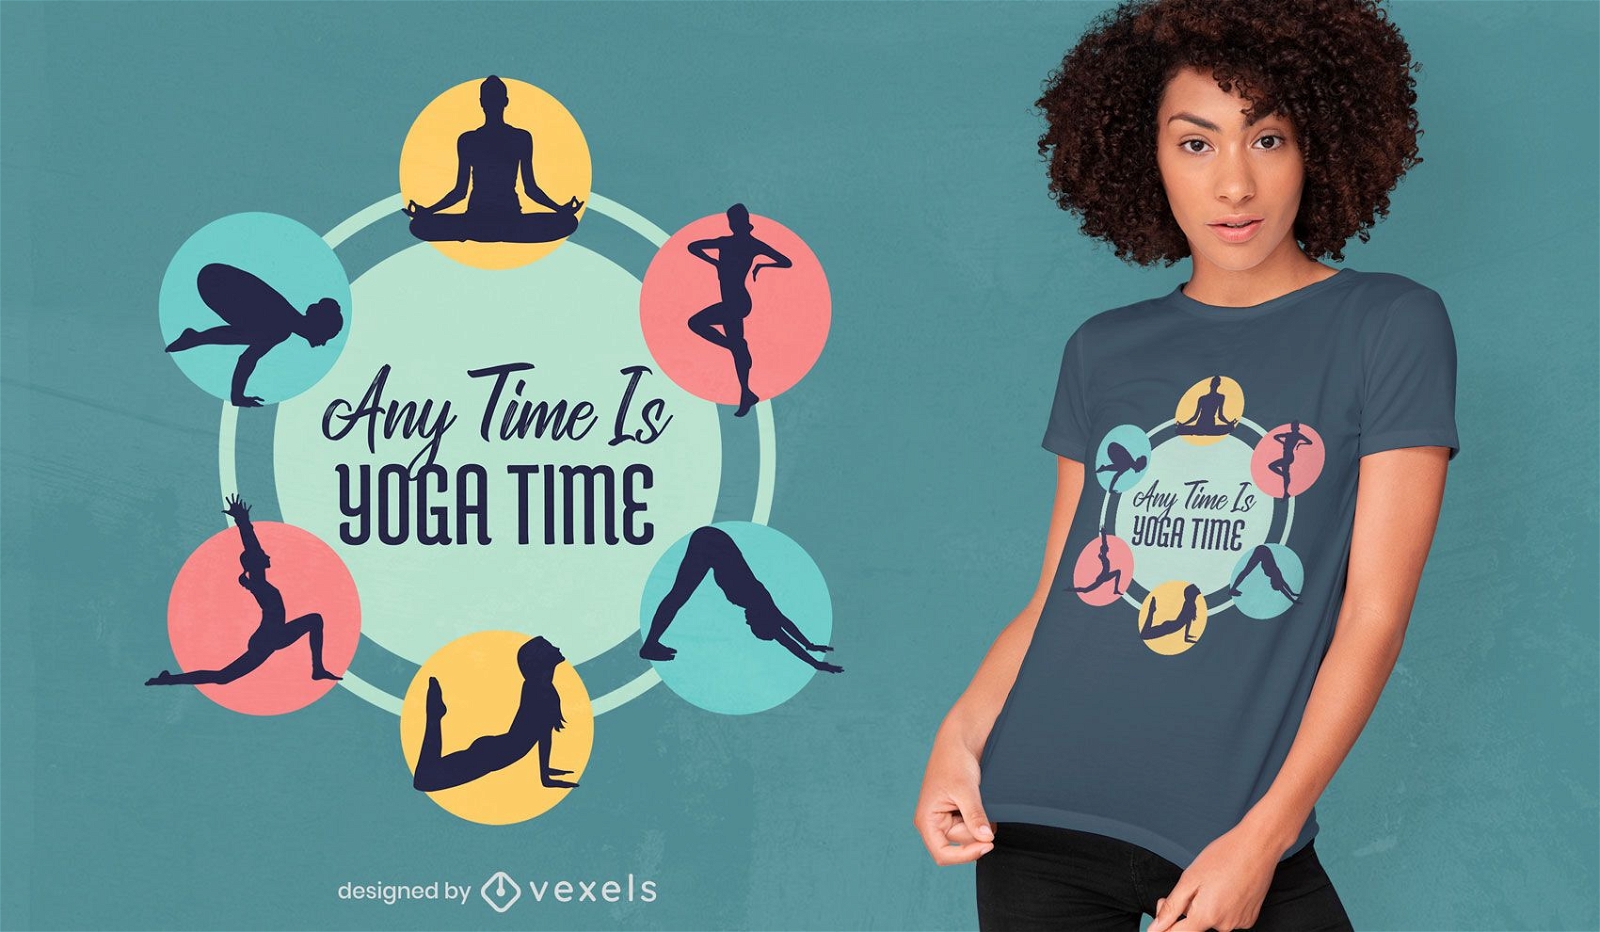 https://images.vexels.com/content/241060/preview/any-time-yoga-time-t-shirt-design-22a28f.png